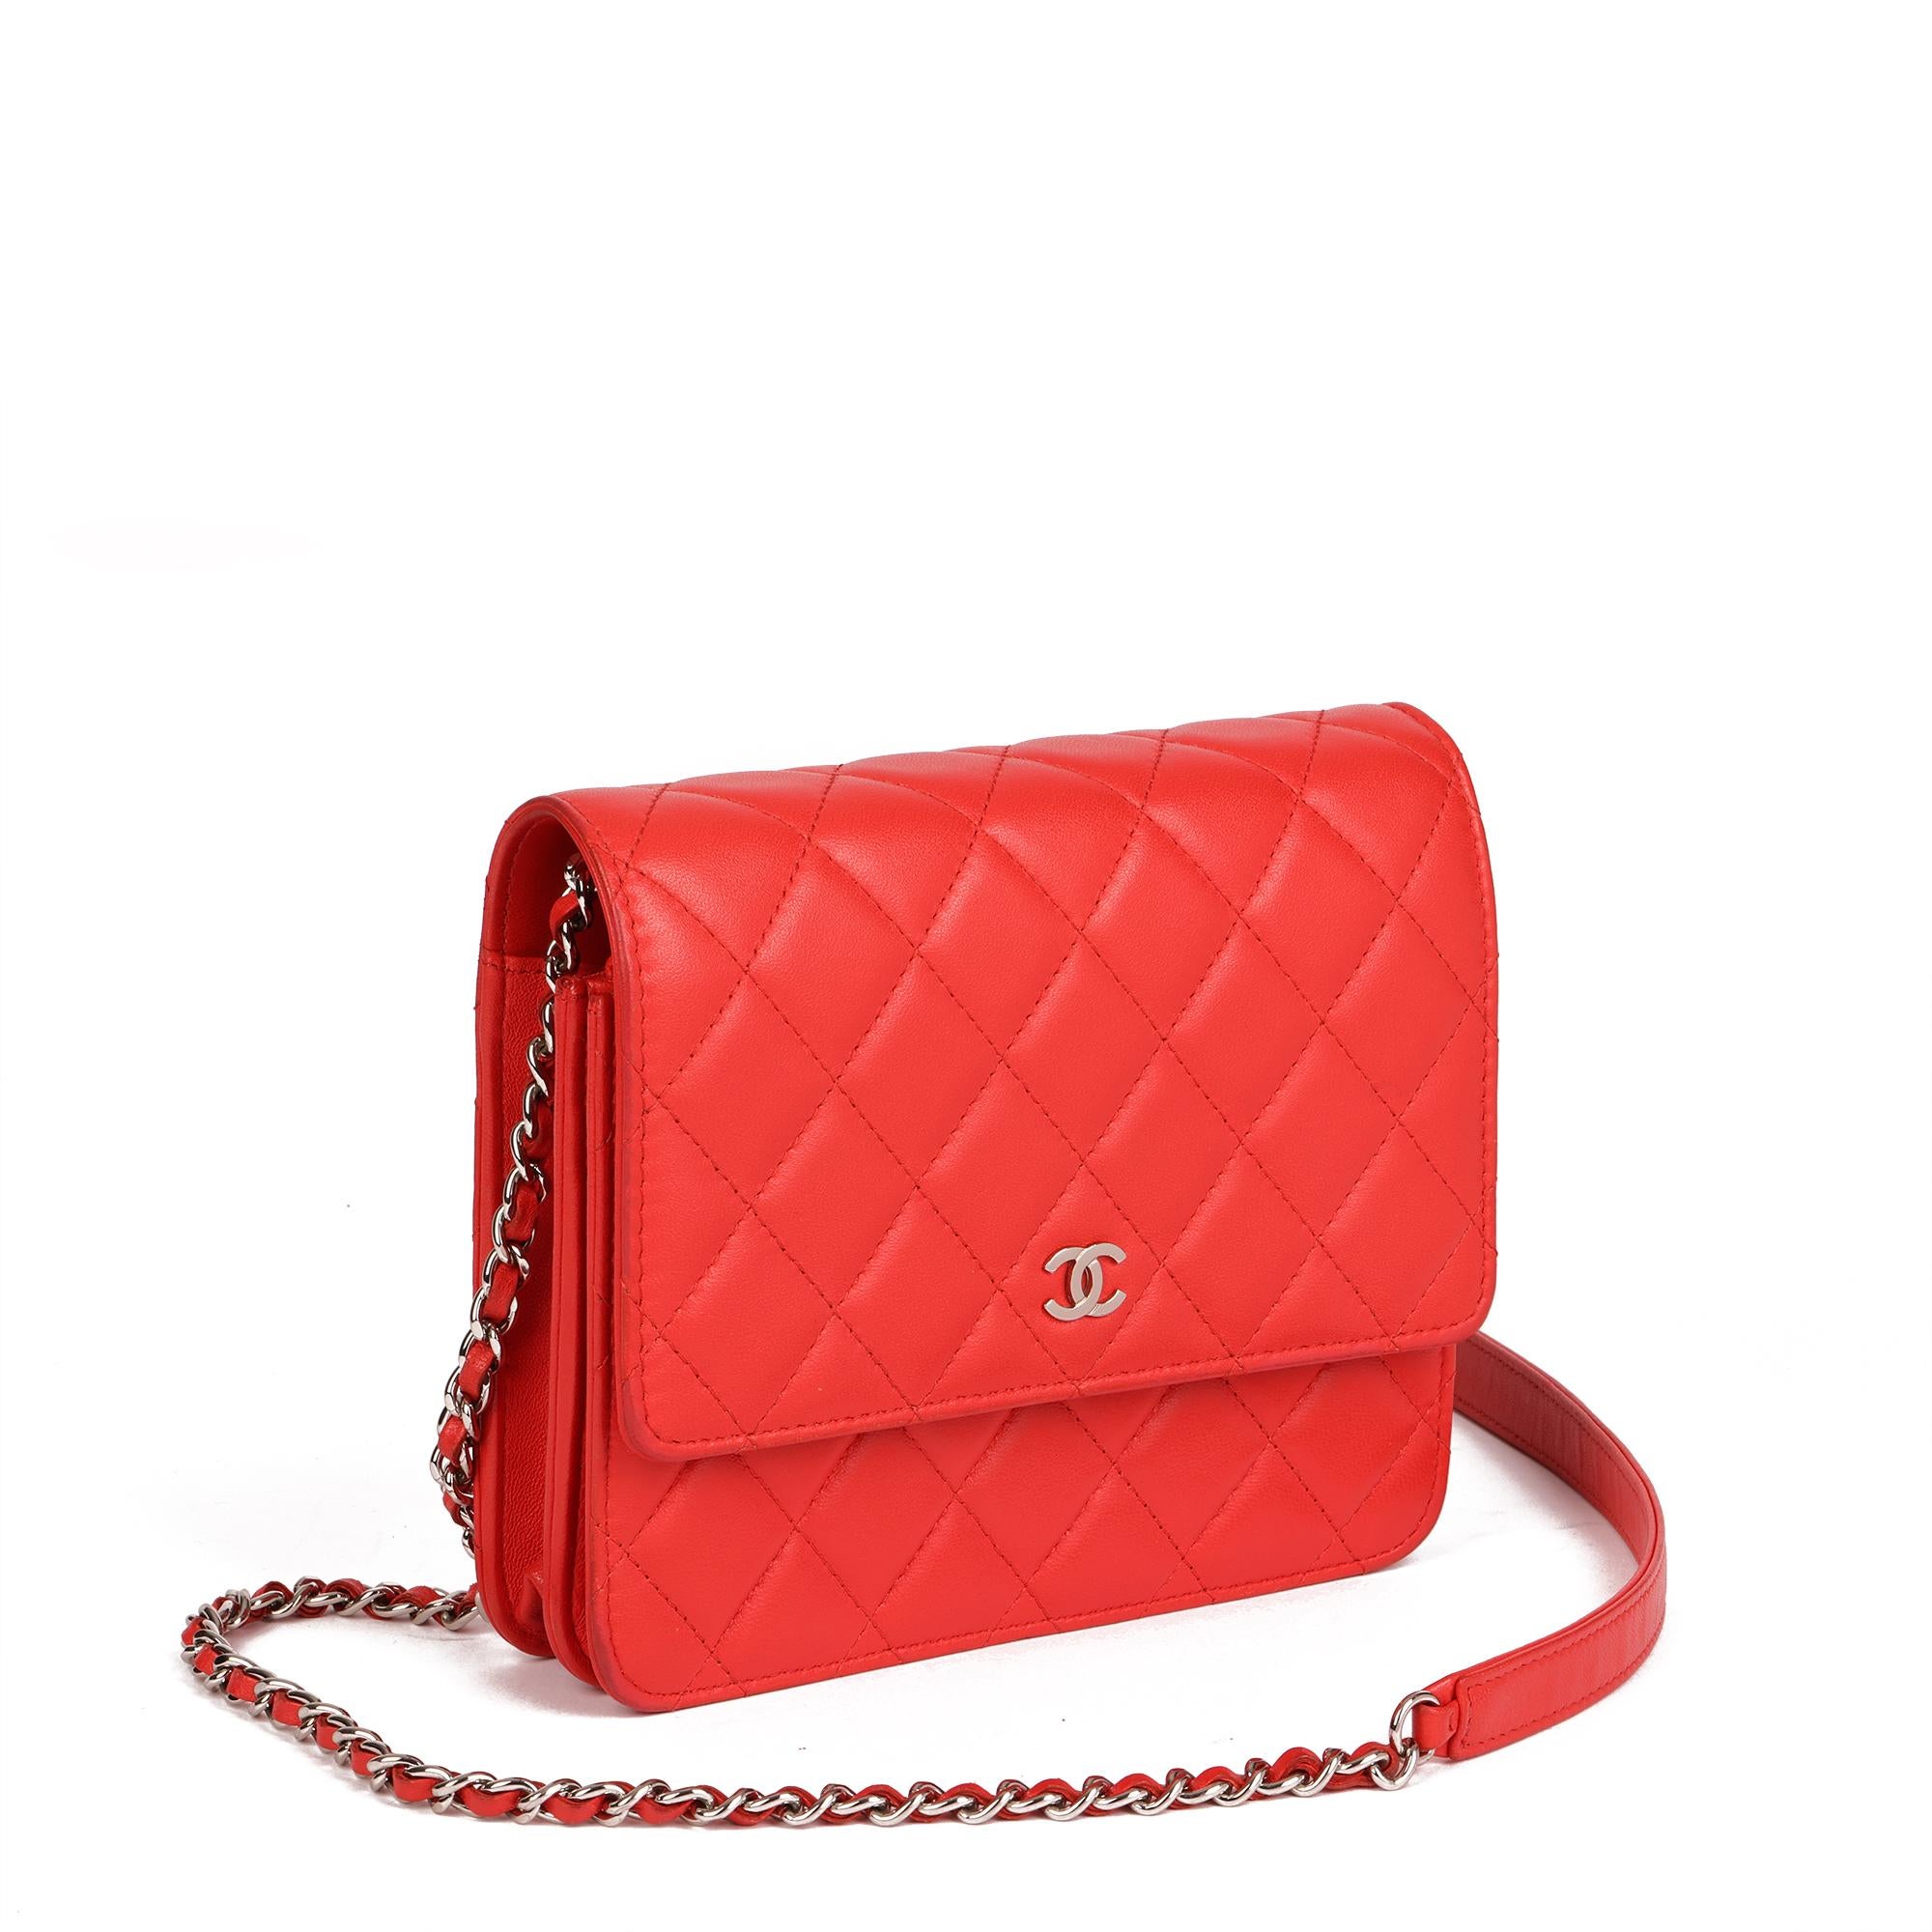 CHANEL
Red Quilted Lambskin Square Wallet-on-Chain WOC

Xupes Reference: HB4625
Serial Number: 26869320
Age (Circa): 2019
Accompanied By: Chanel Dust Bag, Box, Authenticity Card, Care Booklet, Protective Felt
Authenticity Details: Authenticity Card,